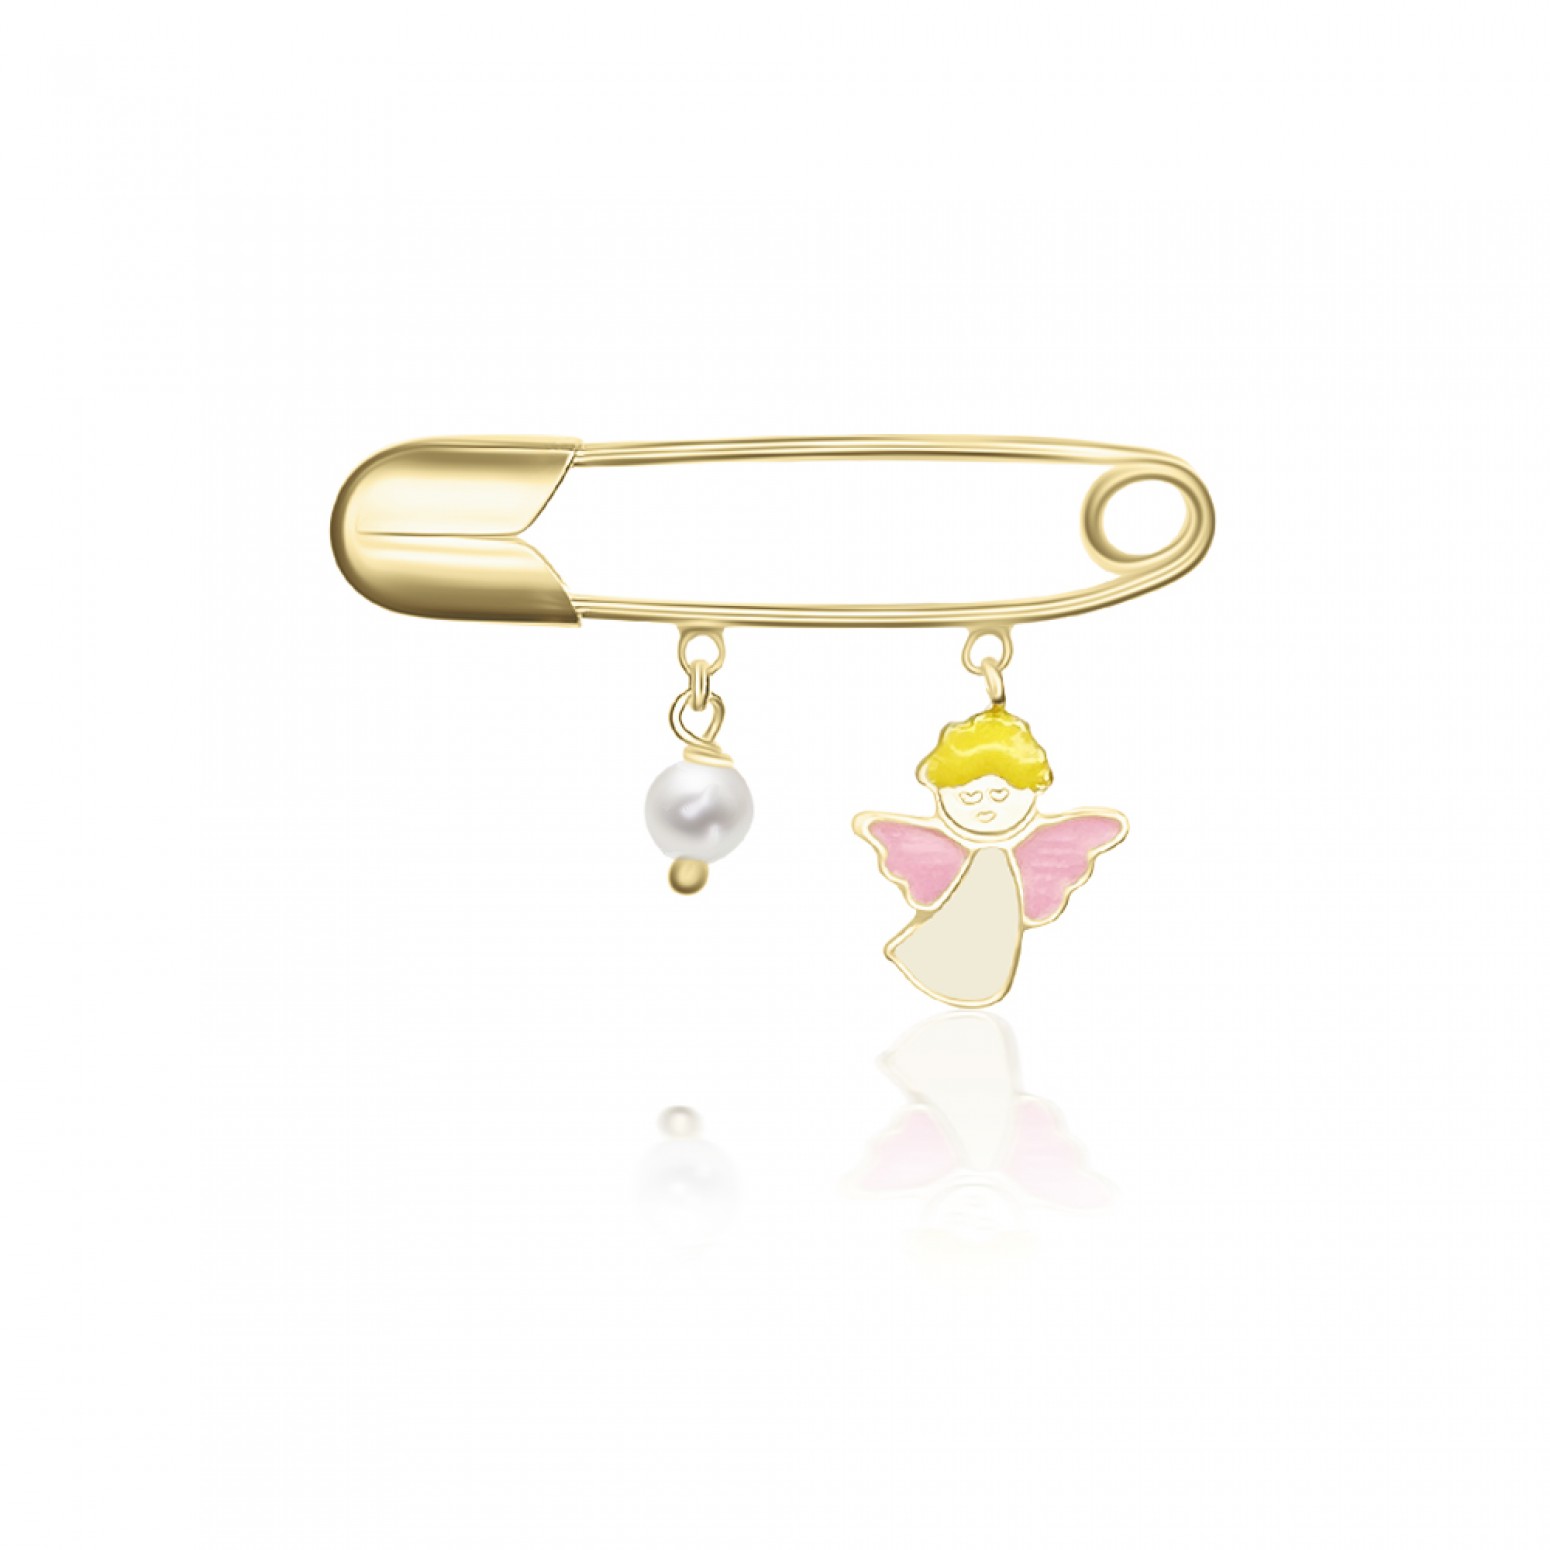 Babies pin K9 gold with angel, white pearl and enamel pf0169 BABIES Κοσμηματα - chrilia.gr